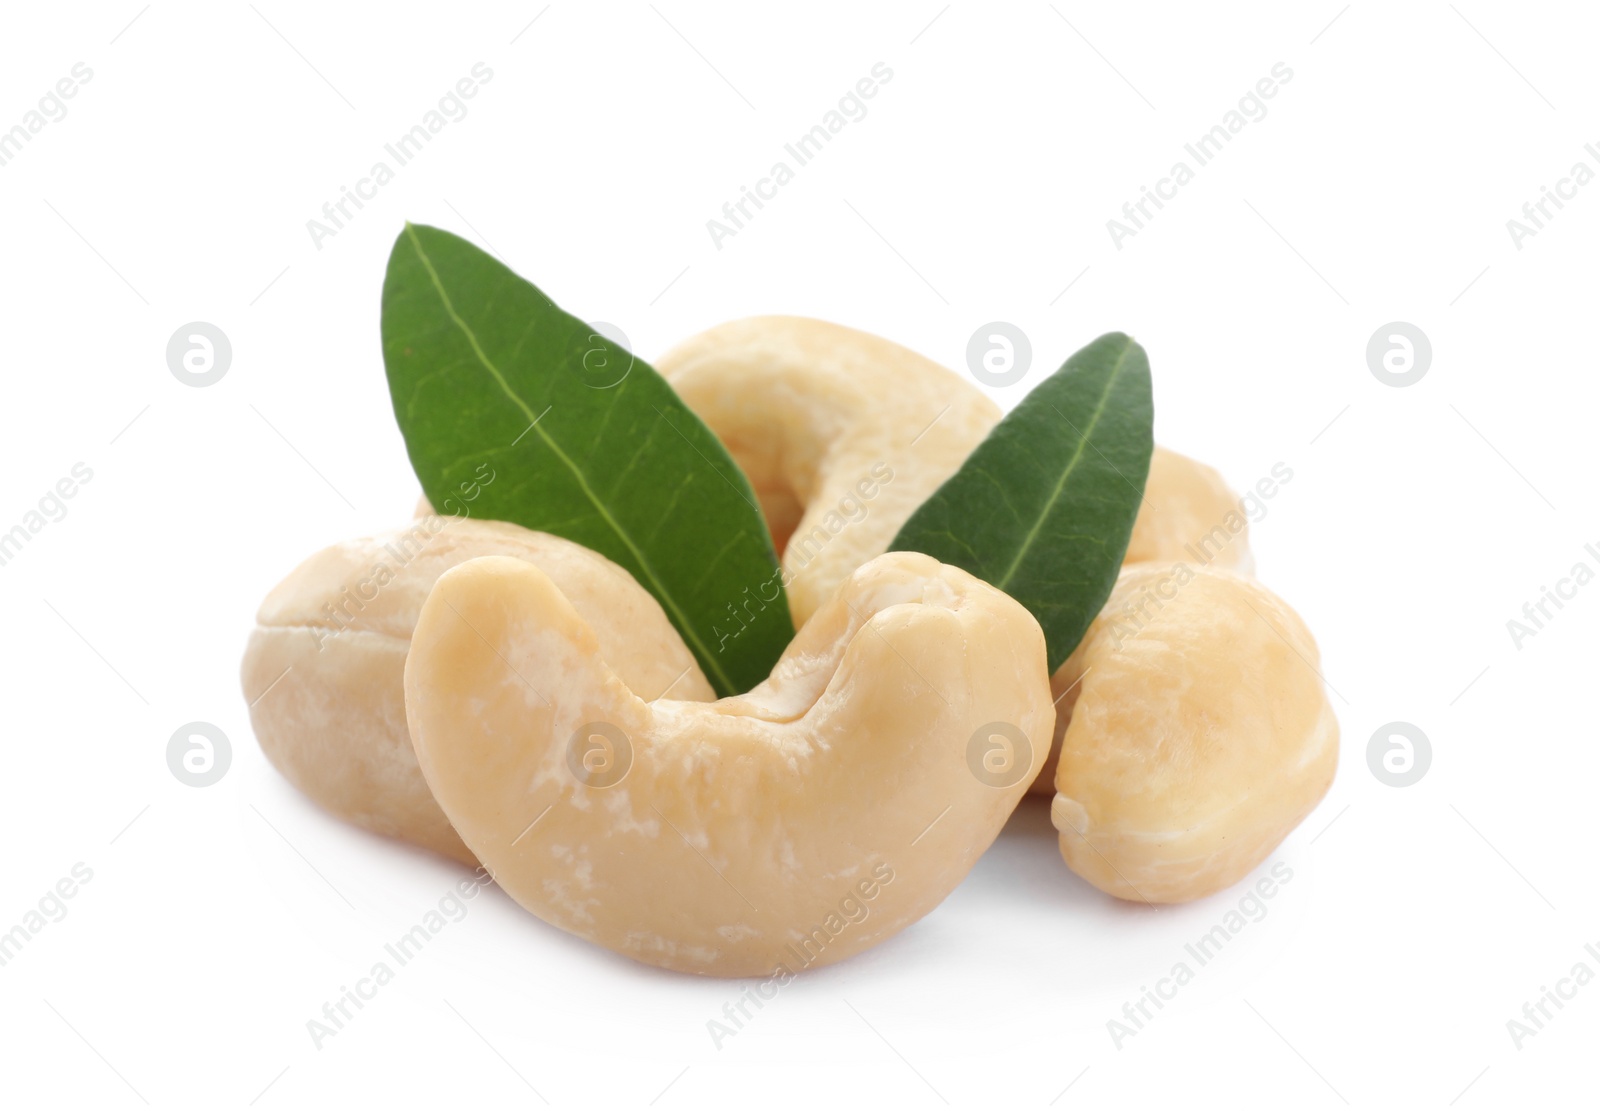 Photo of Tasty organic cashew nuts and green leaves isolated on white